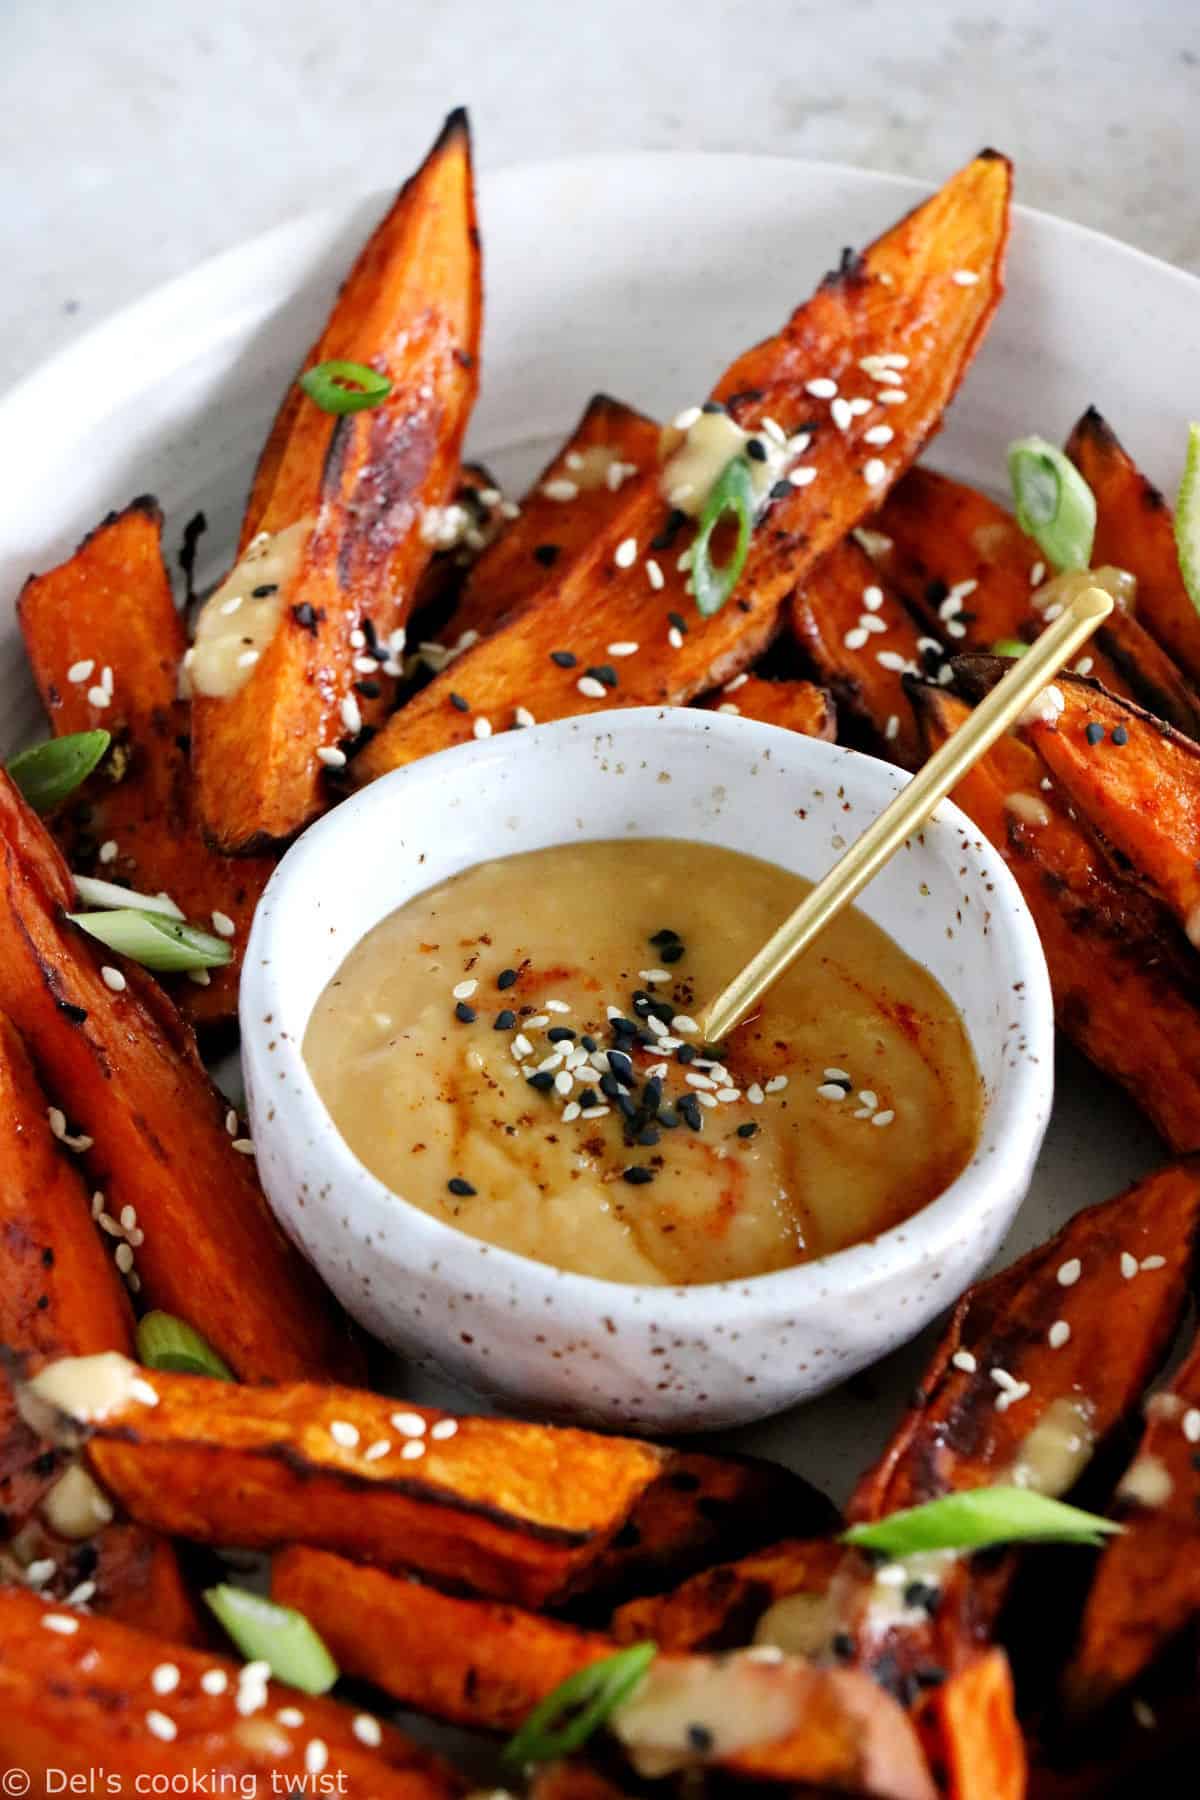 These miso roasted sweet potatoes are super crispy, spicy, sweet, and served with an incredible Japanese-inspired miso sauce, loaded with umami flavors.